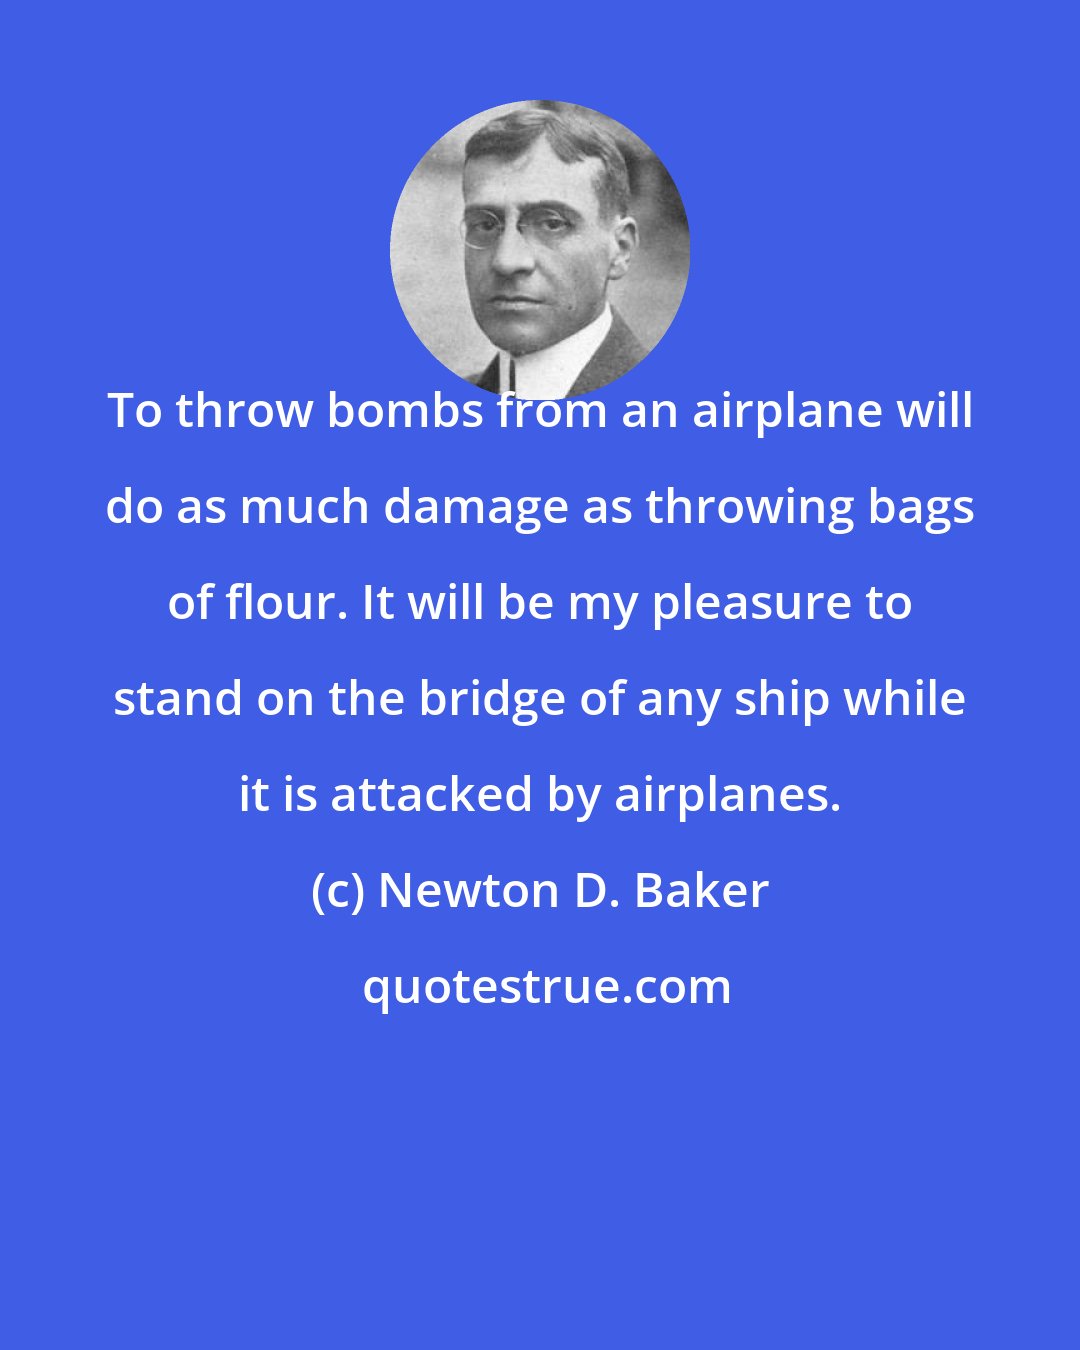 Newton D. Baker: To throw bombs from an airplane will do as much damage as throwing bags of flour. It will be my pleasure to stand on the bridge of any ship while it is attacked by airplanes.